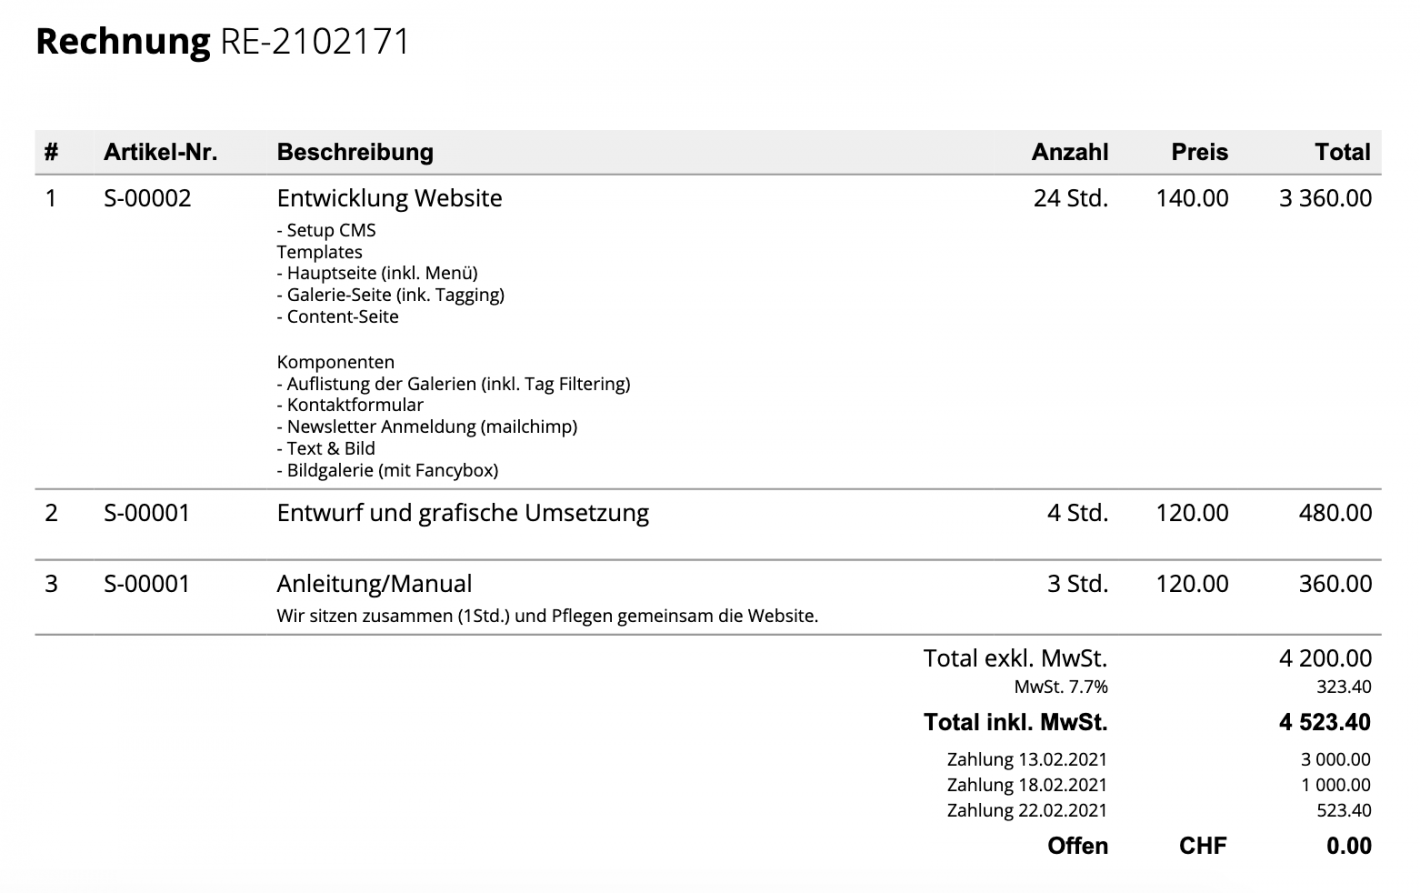 Screenshot/view of an invoice with all partial payments listed.